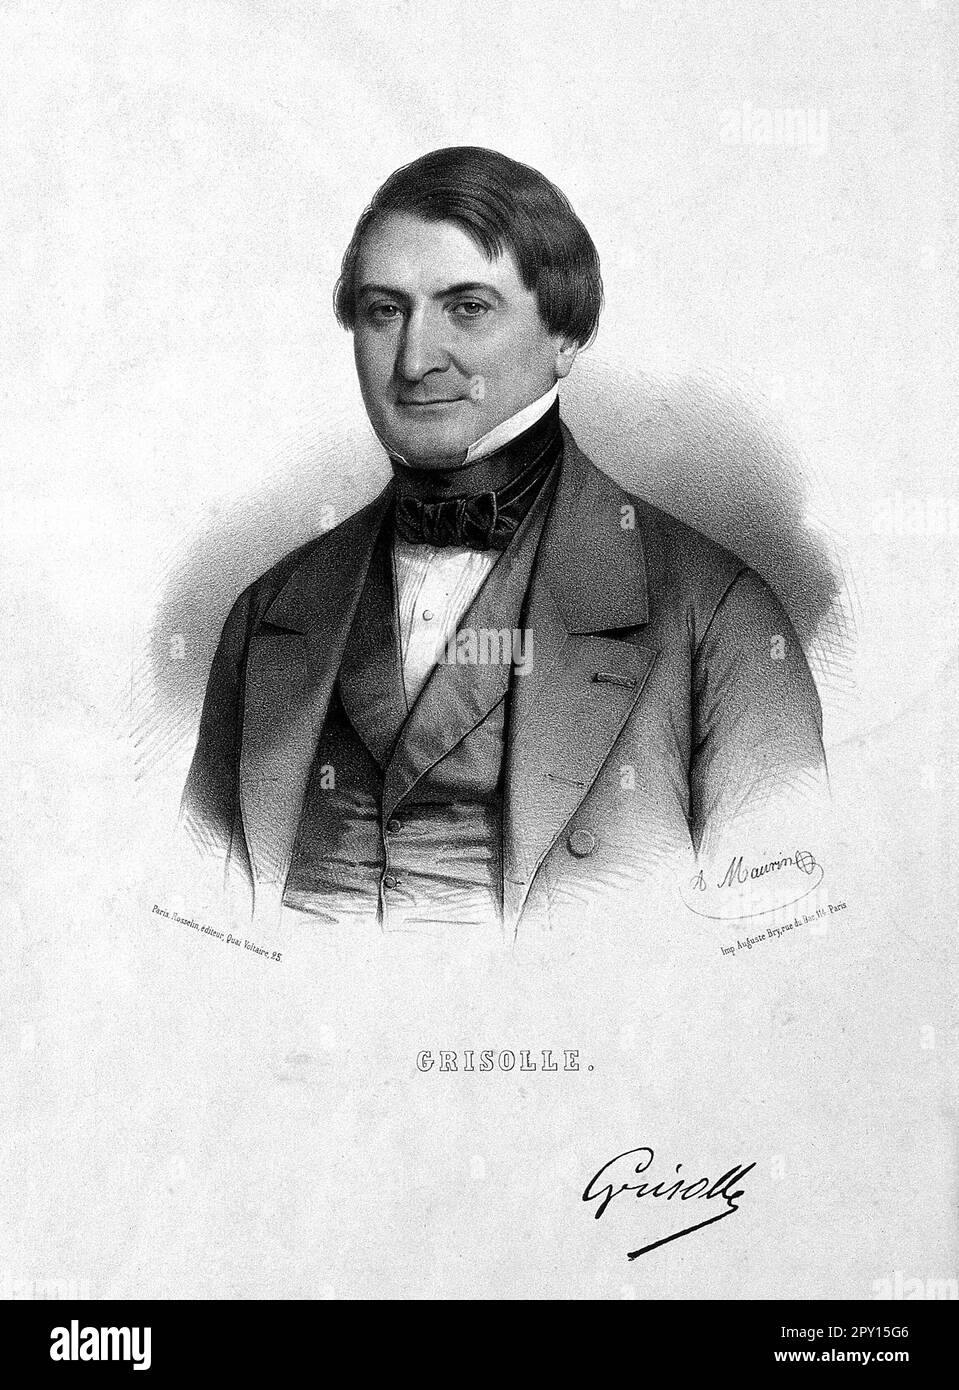 Augustin Grisolle, 1811 – 1869, was a French physician, vintage lithograph by Antoine Maurin 1800s Stock Photo